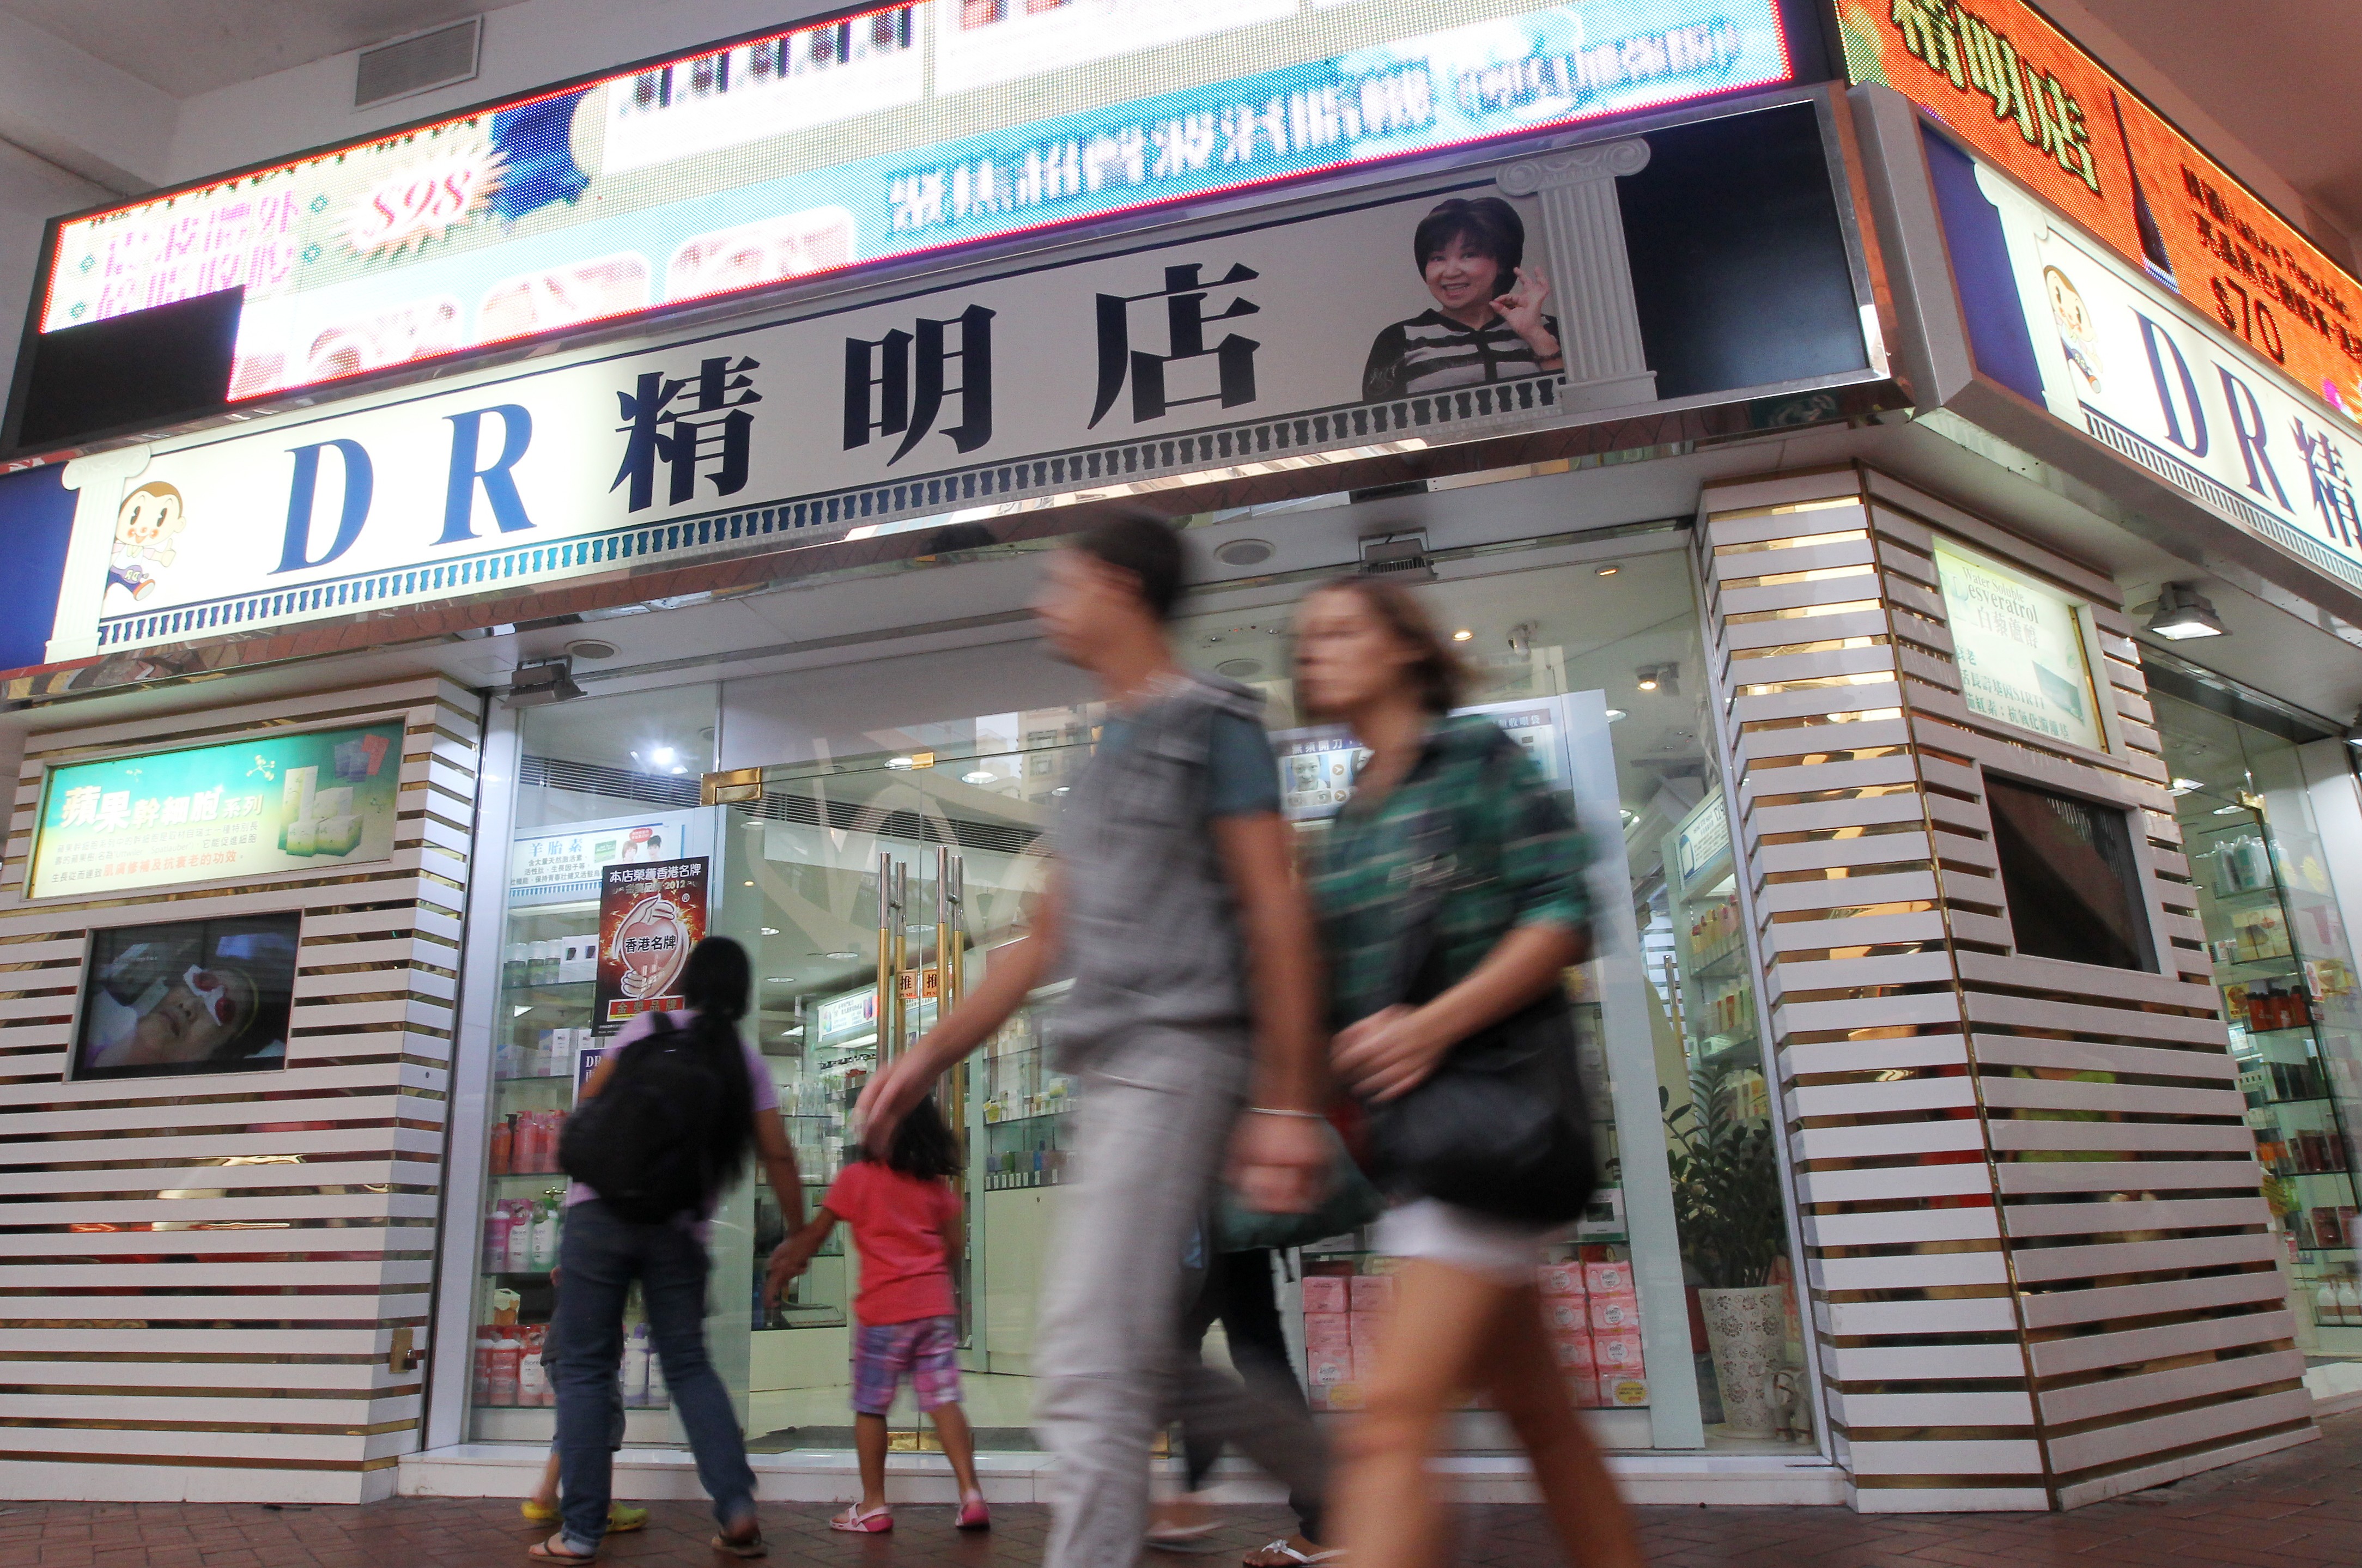 Four women fell ill in 2012 after receiving CIK cell therapy at beauty clinics run by the DR Group. Photo: Edward Wong